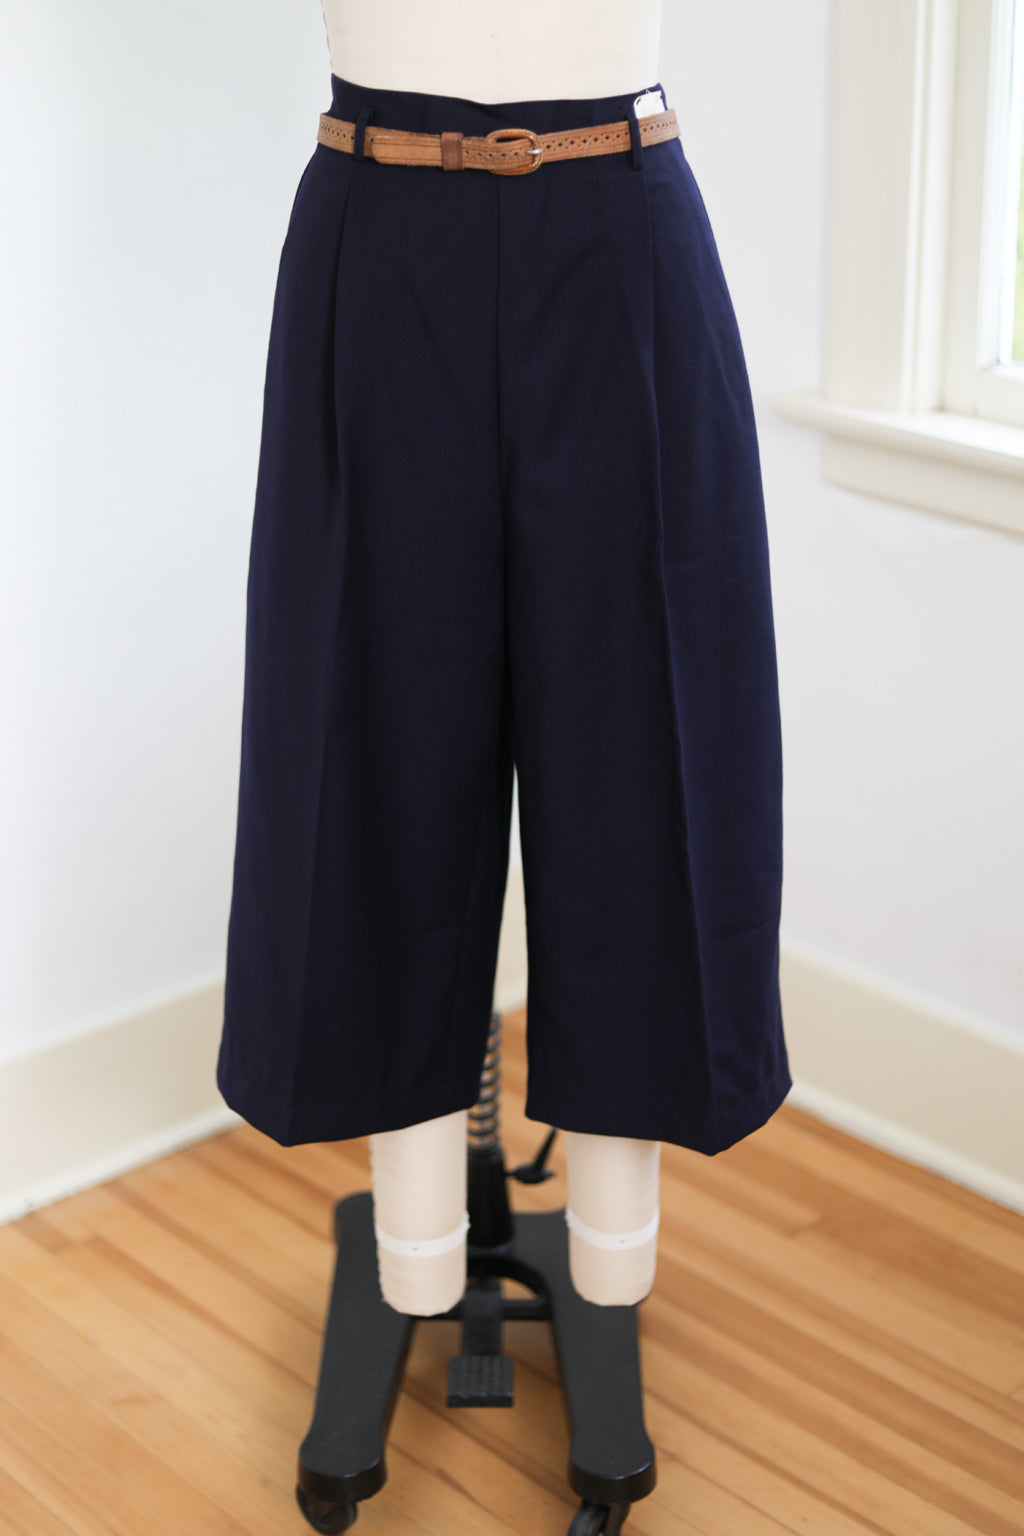 Vintage 1940s RARE Deadstock Wide Leg Culottes Pants - Navy Twill